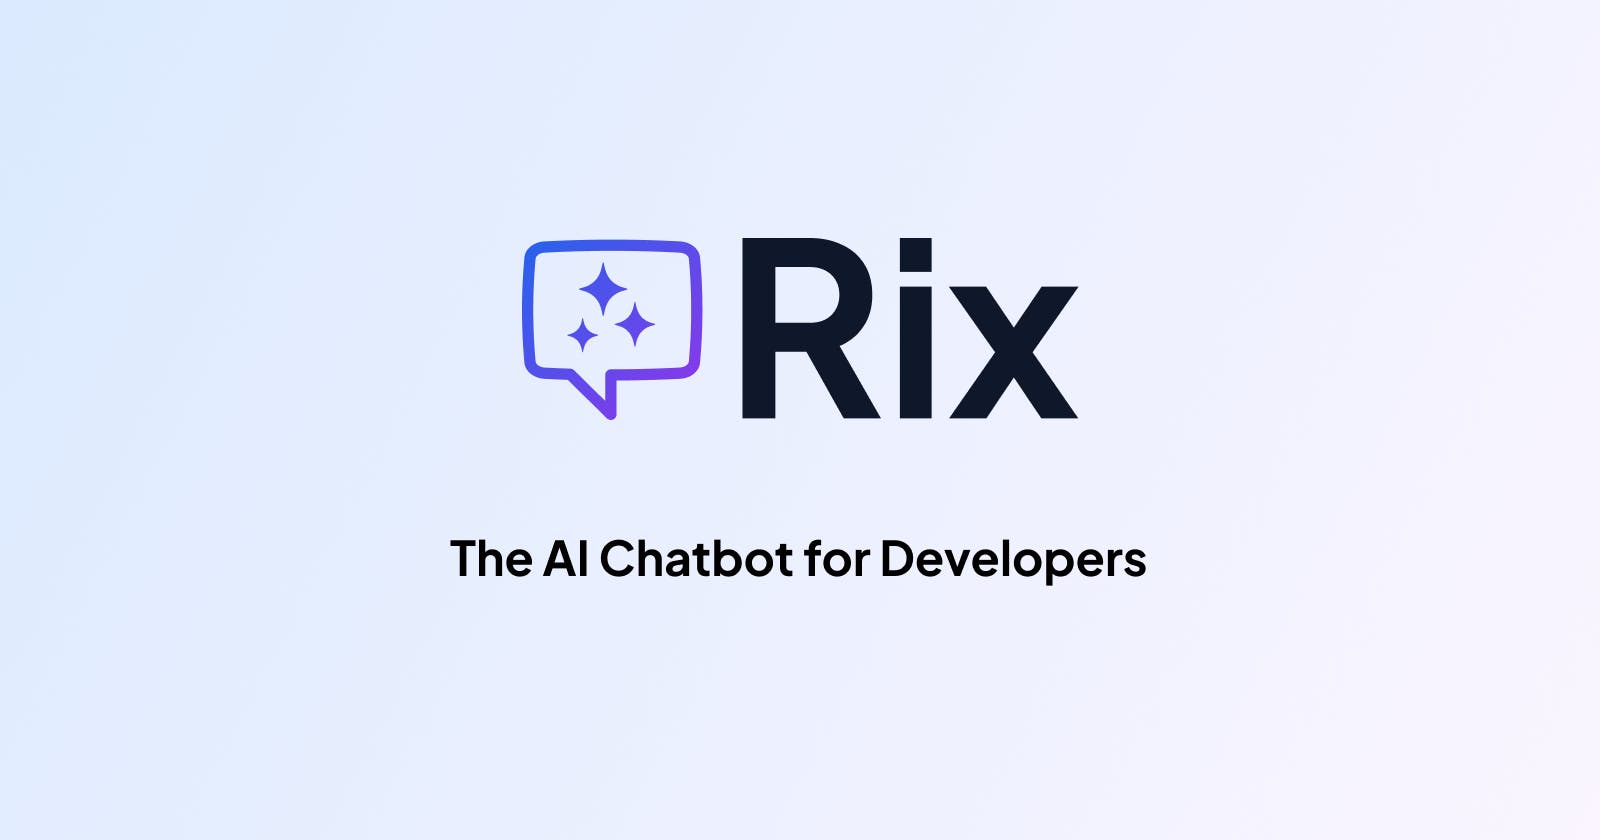 🚀 Introducing Rix, the AI chatbot for developers